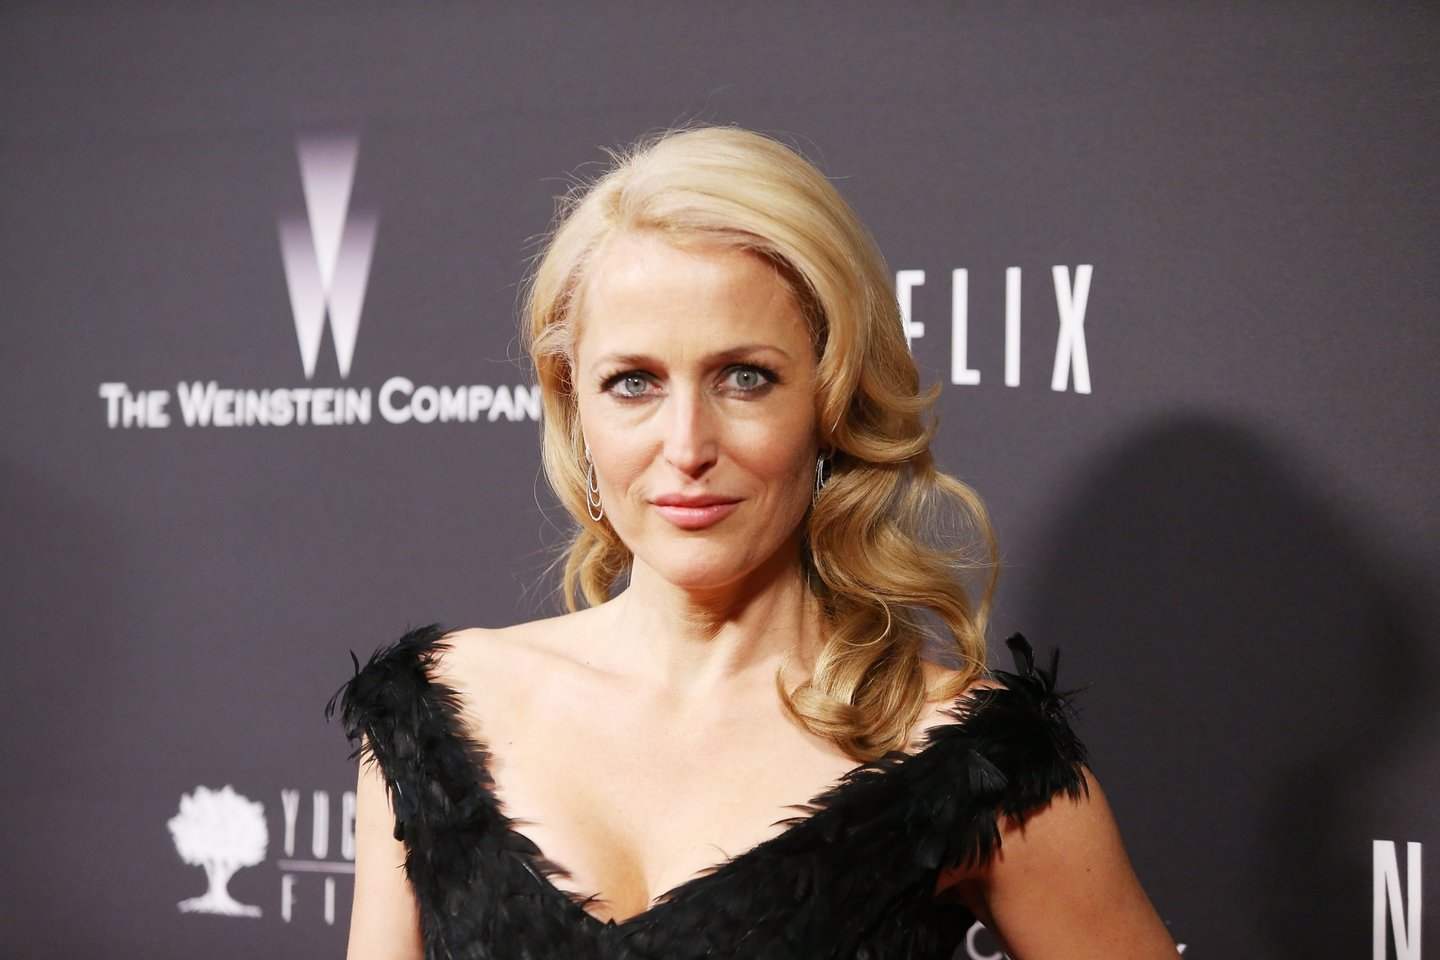 BEVERLY HILLS, CA - JANUARY 12: Gillian Anderson arrives at The Weinstein Company and NetFlix 2014 Golden Globe Awards after party held on January 12, 2014 in Beverly Hills, California. (Photo by Michael Tran/FilmMagic)